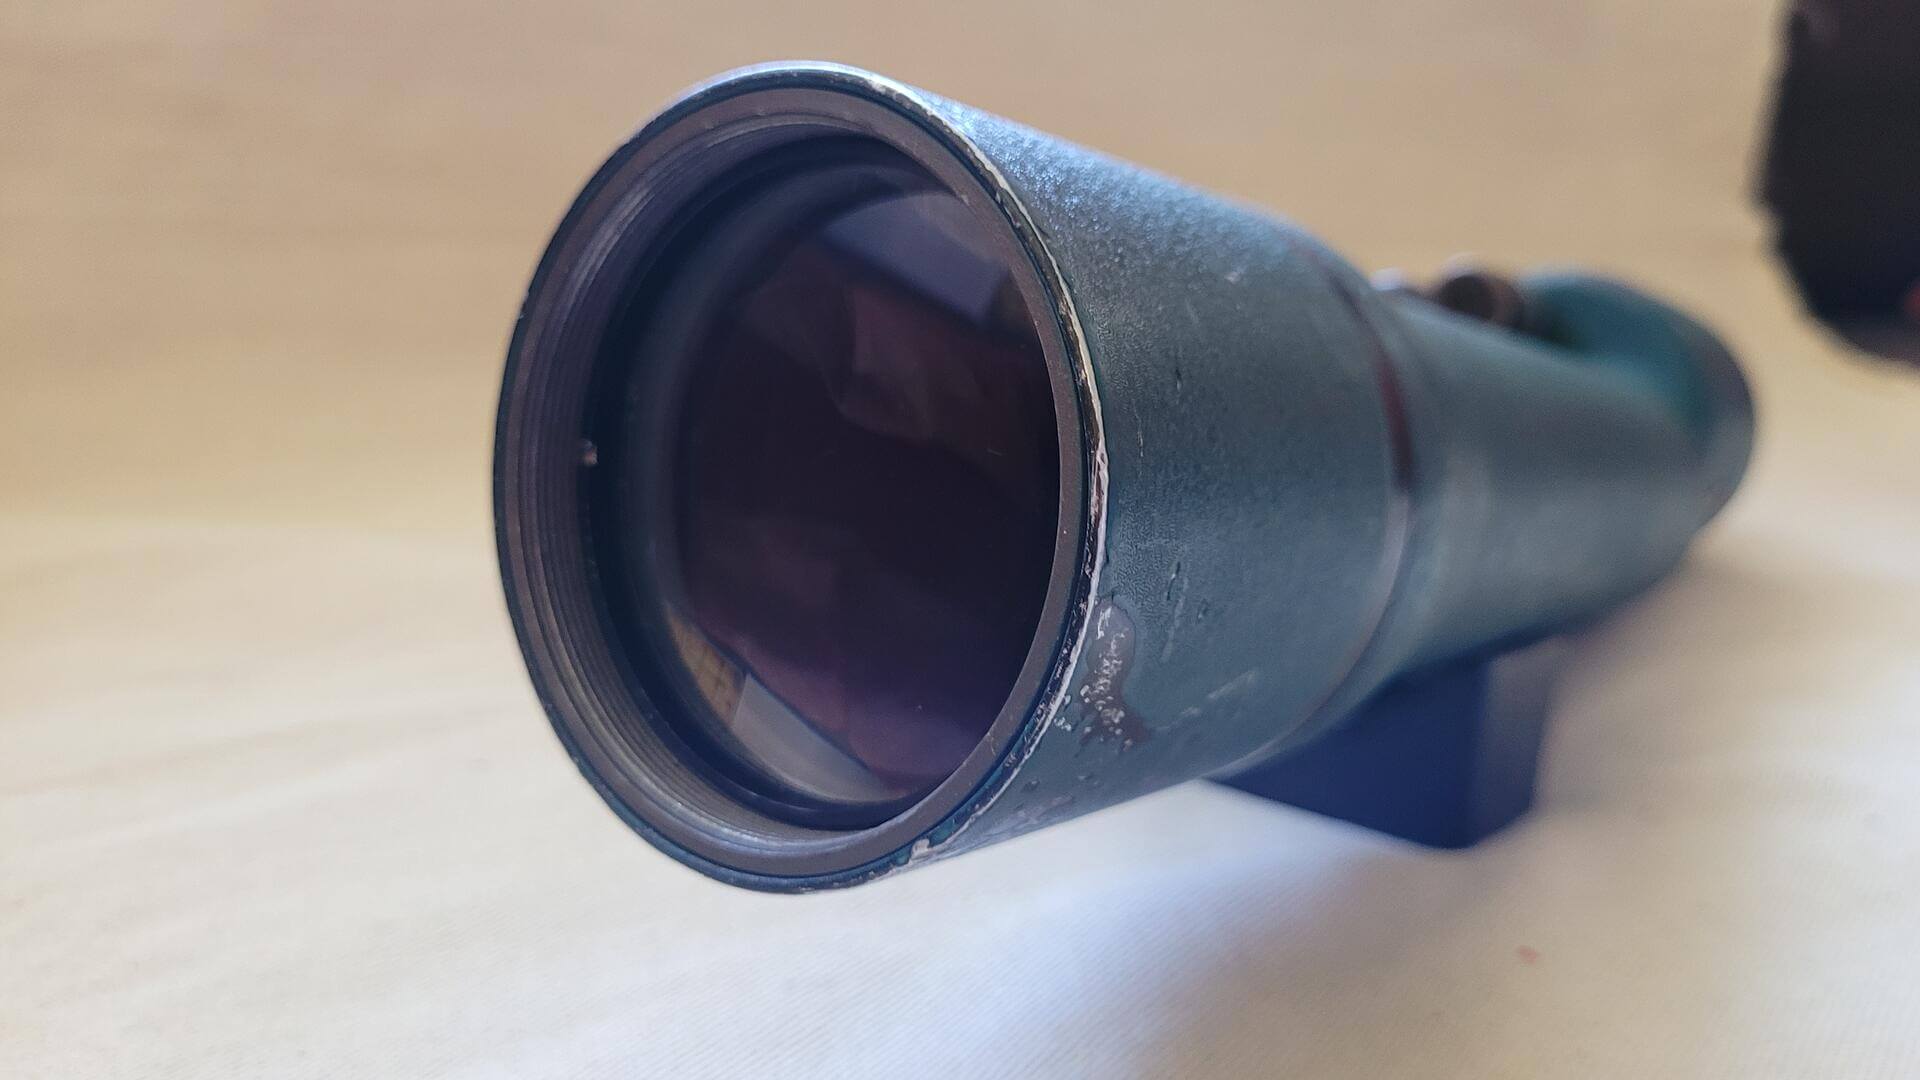 Vintage Bausch & Lomb 60mm Spotting Scope Baloscope 25x Eyepiece Rochester NY - Antique made in USA collectible optical tools and navigation devices